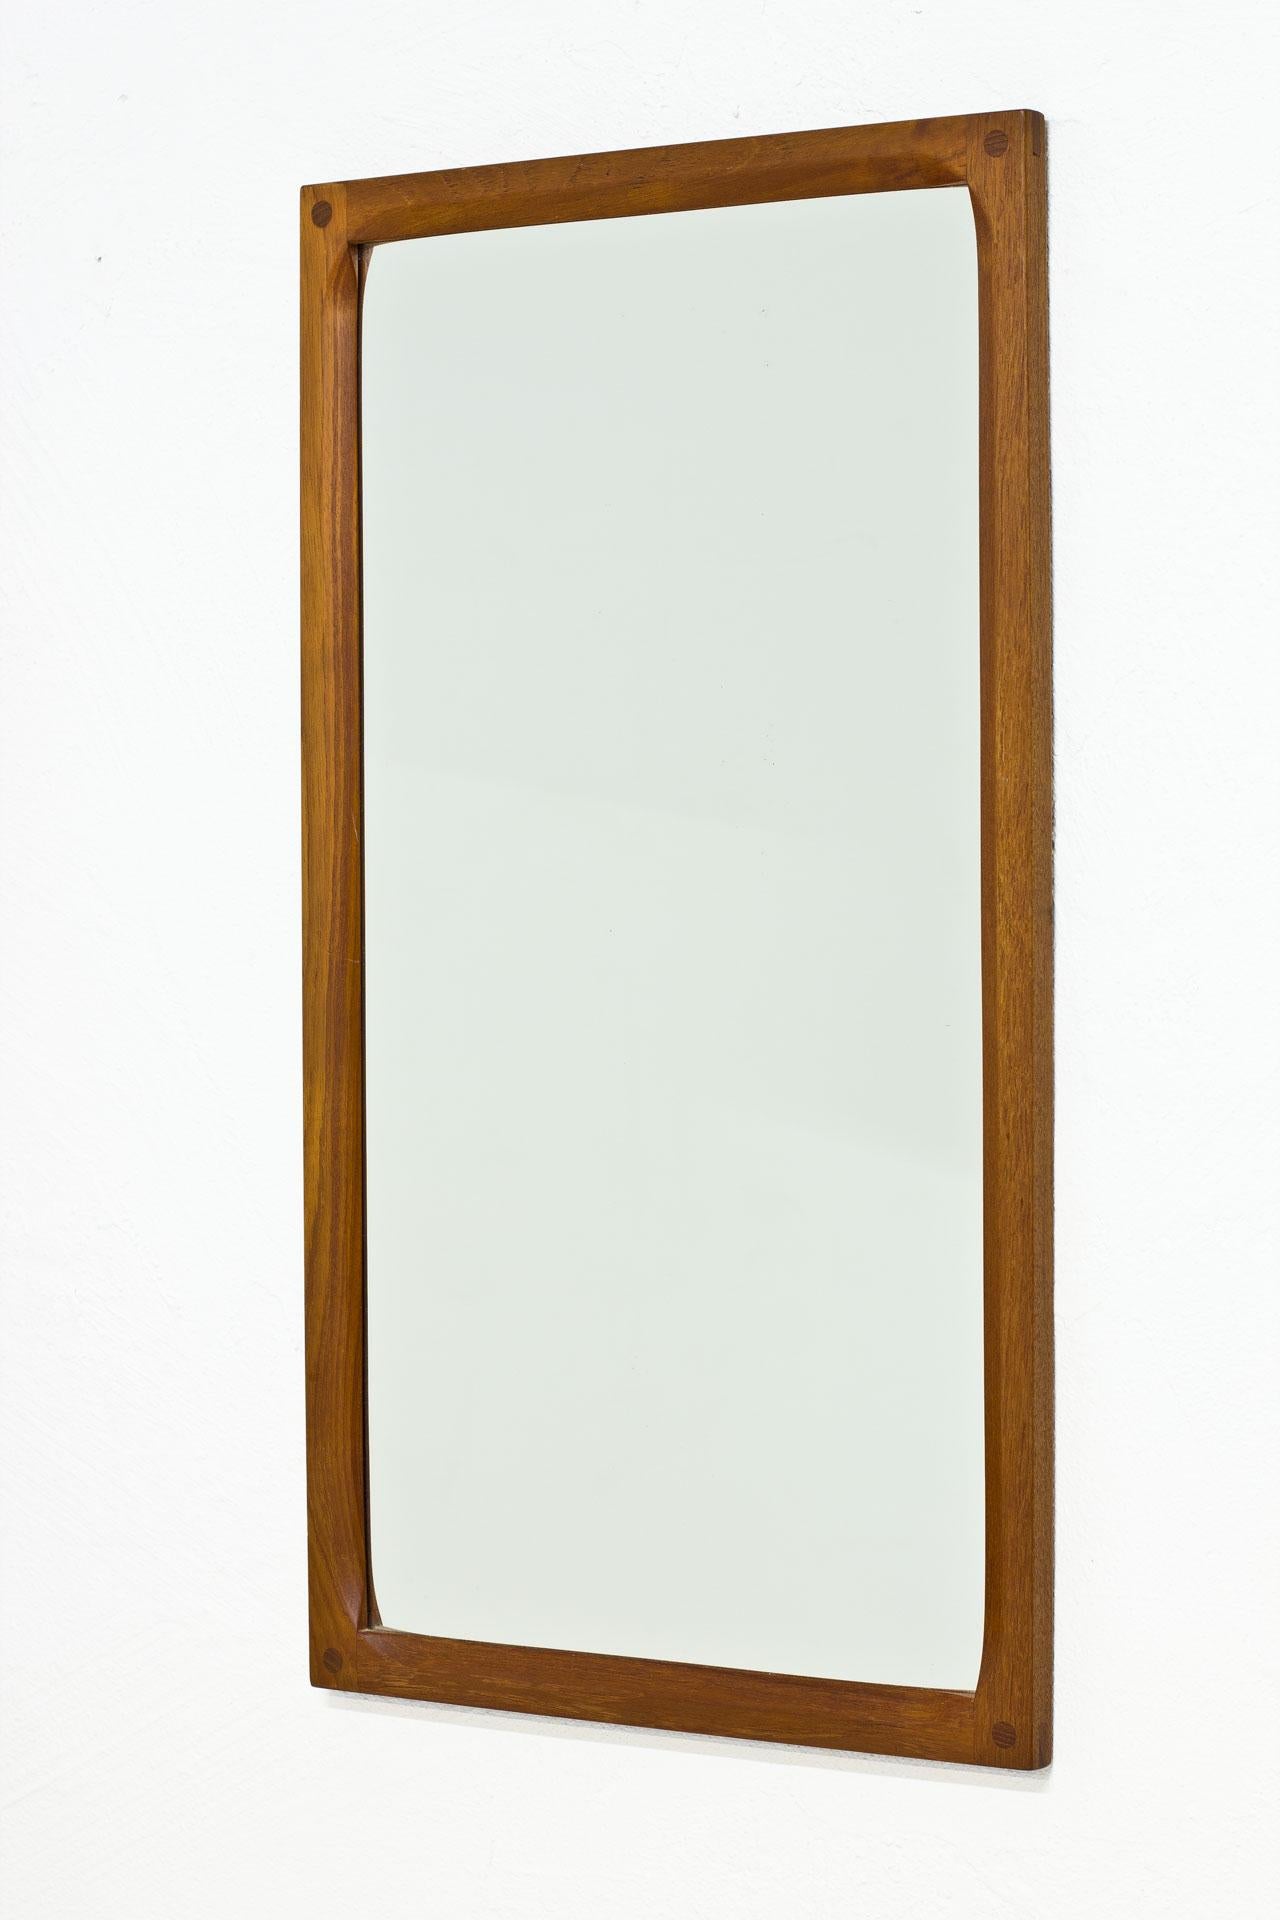 Rectangular wall mirror N° 162 designed by Kai Kristiansen. Produced in Denmark by Aksel Kjersgaard during the 1950s. Solid teak frame with nice joinery details. Signed on the back.